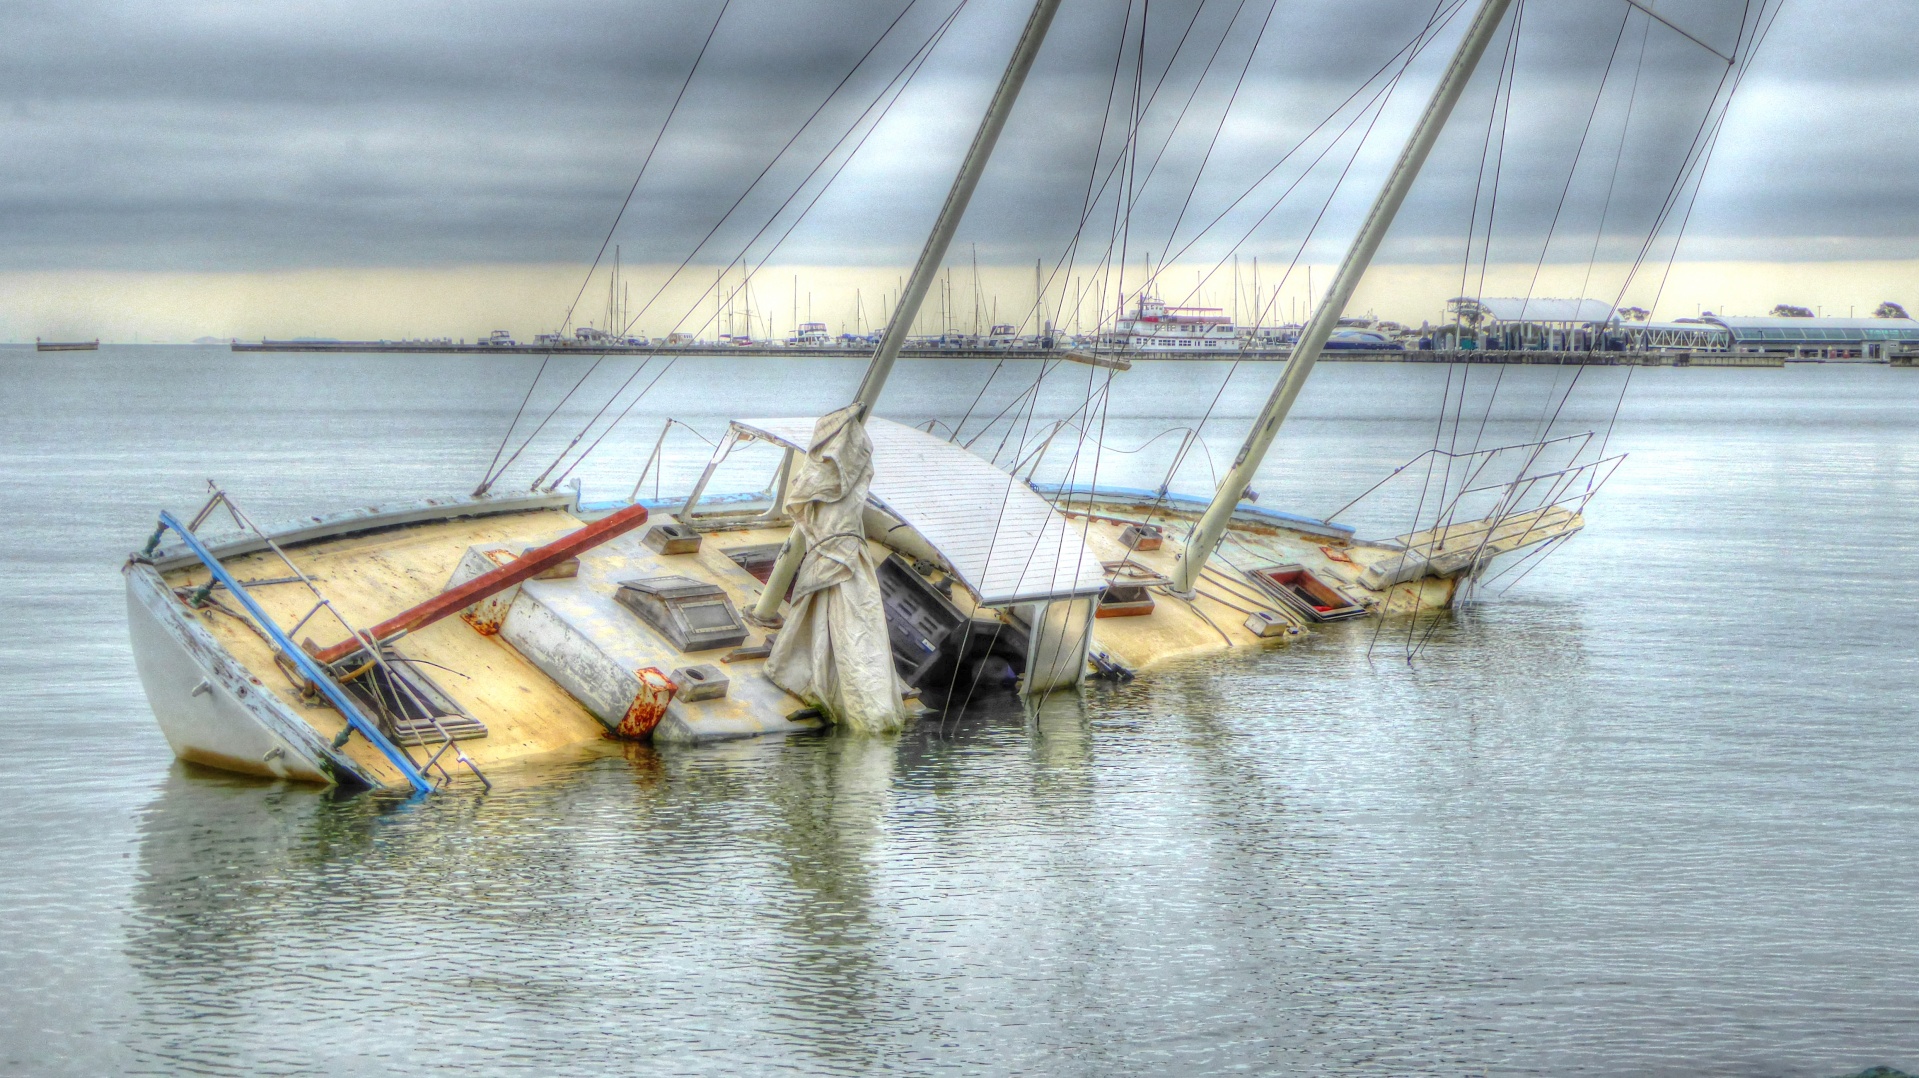 artistic touch applied to a photo of a sunken sail boat